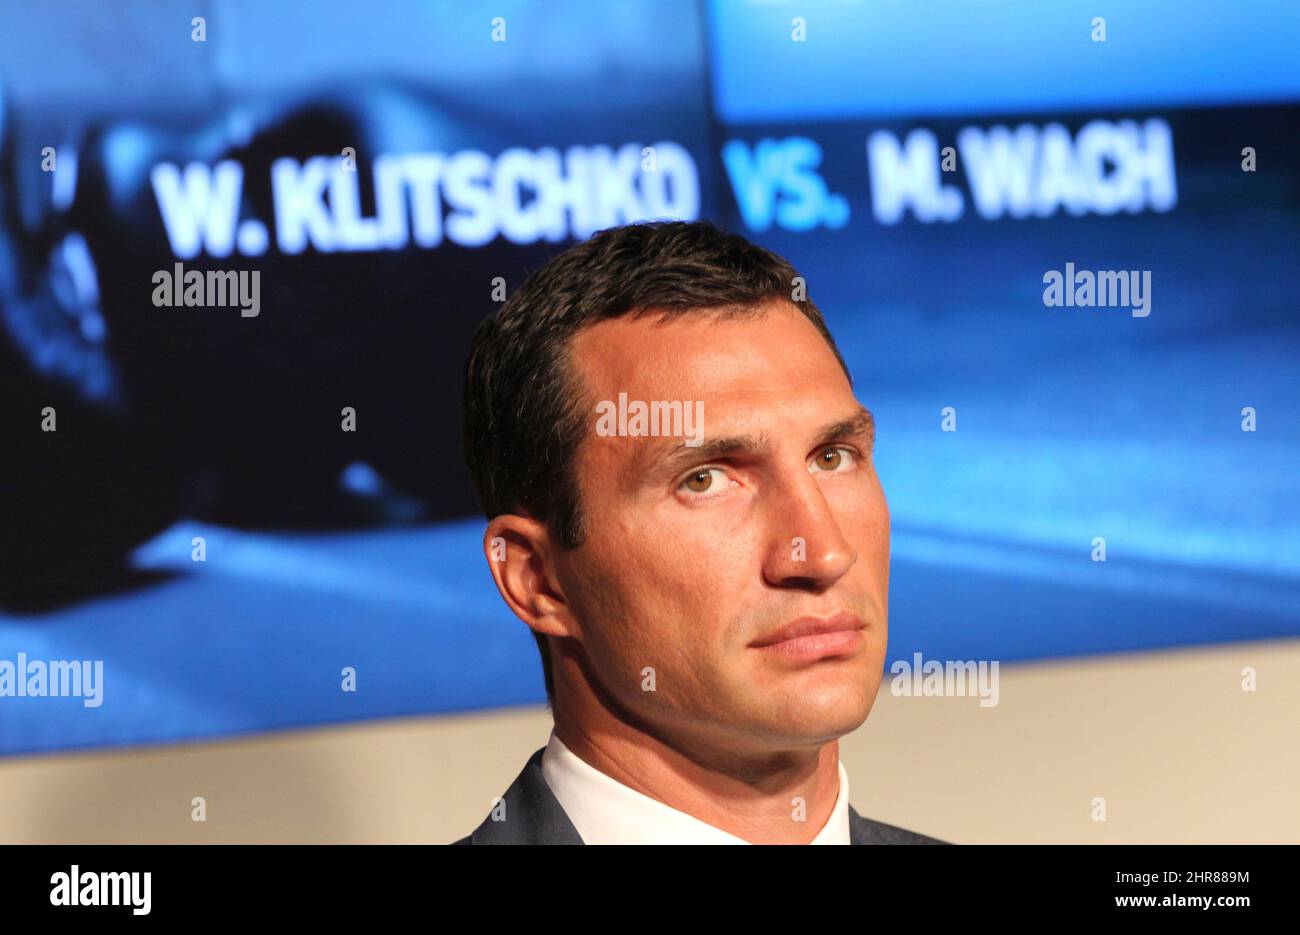 WBO, WBA and IBF world heavyweight boxing champion Wladimir Klitschko from the Ukraine takes part in a press conference in O2 World in Hamburg, Germany, 28 August 2012. Klitschko will try and defend his title against Wach on 10 November 2012. Photo: CHRISTIAN CHARISIUS Stock Photo